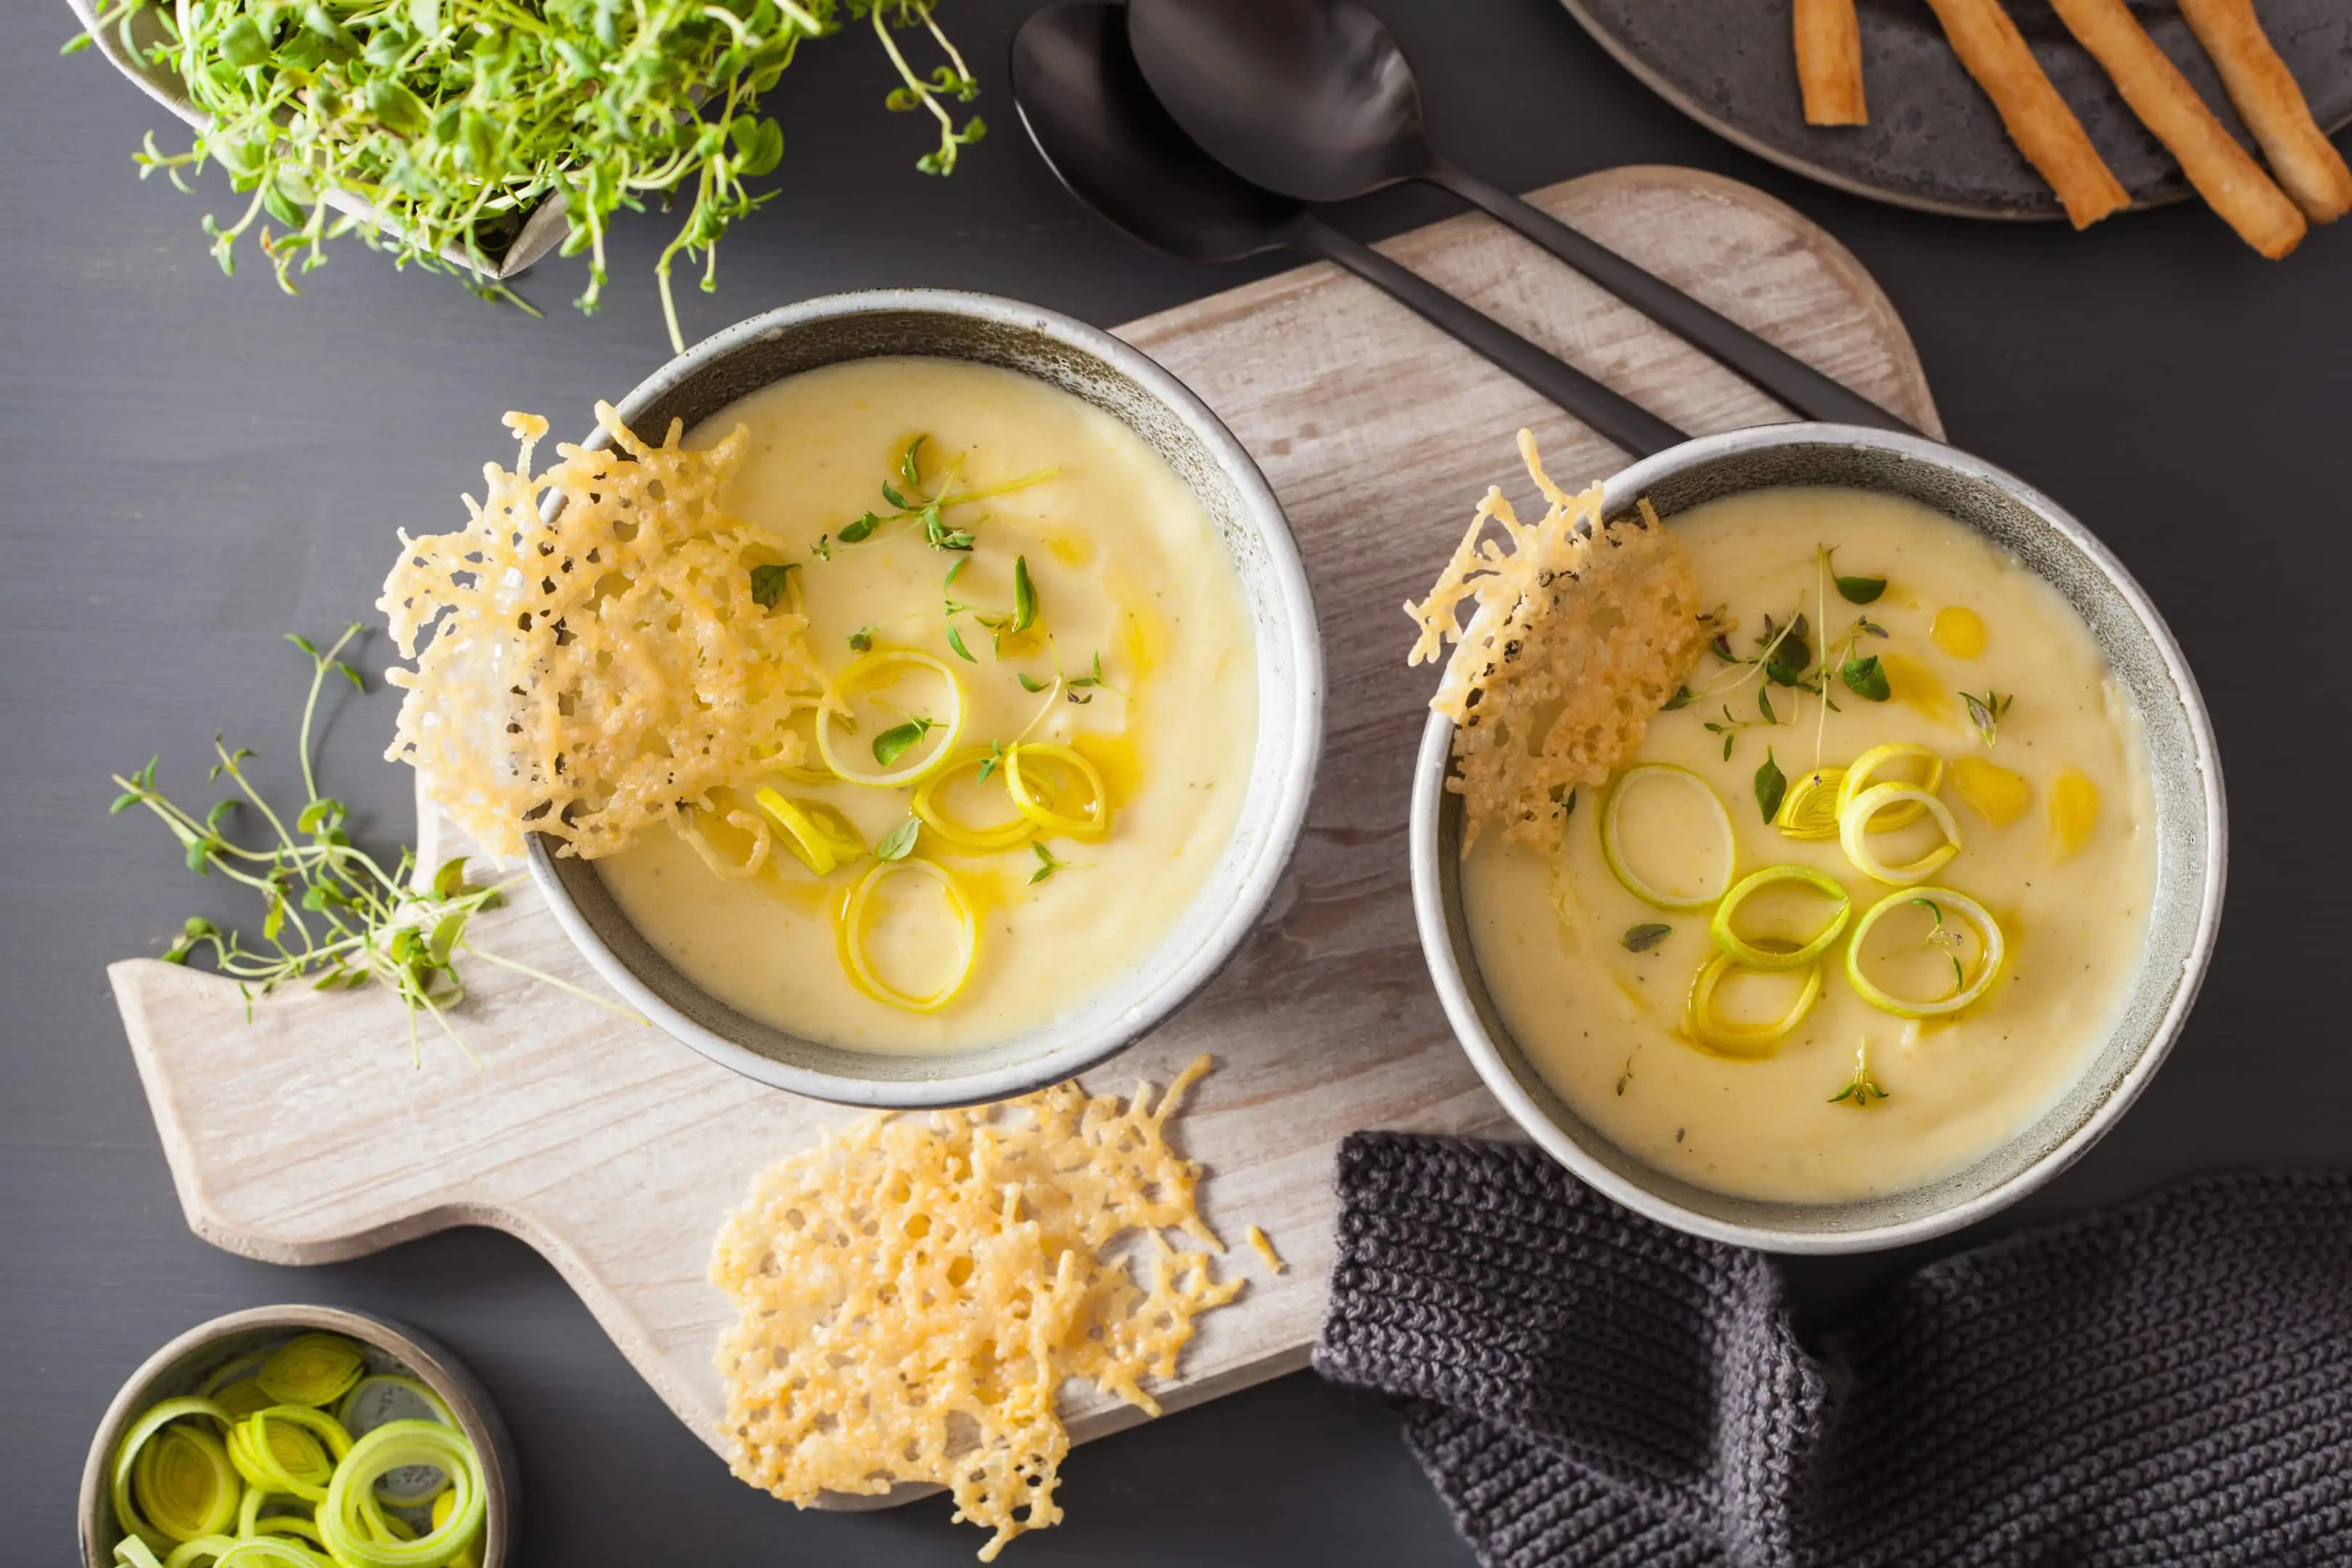 Creamy potato and leeks soup in bowls